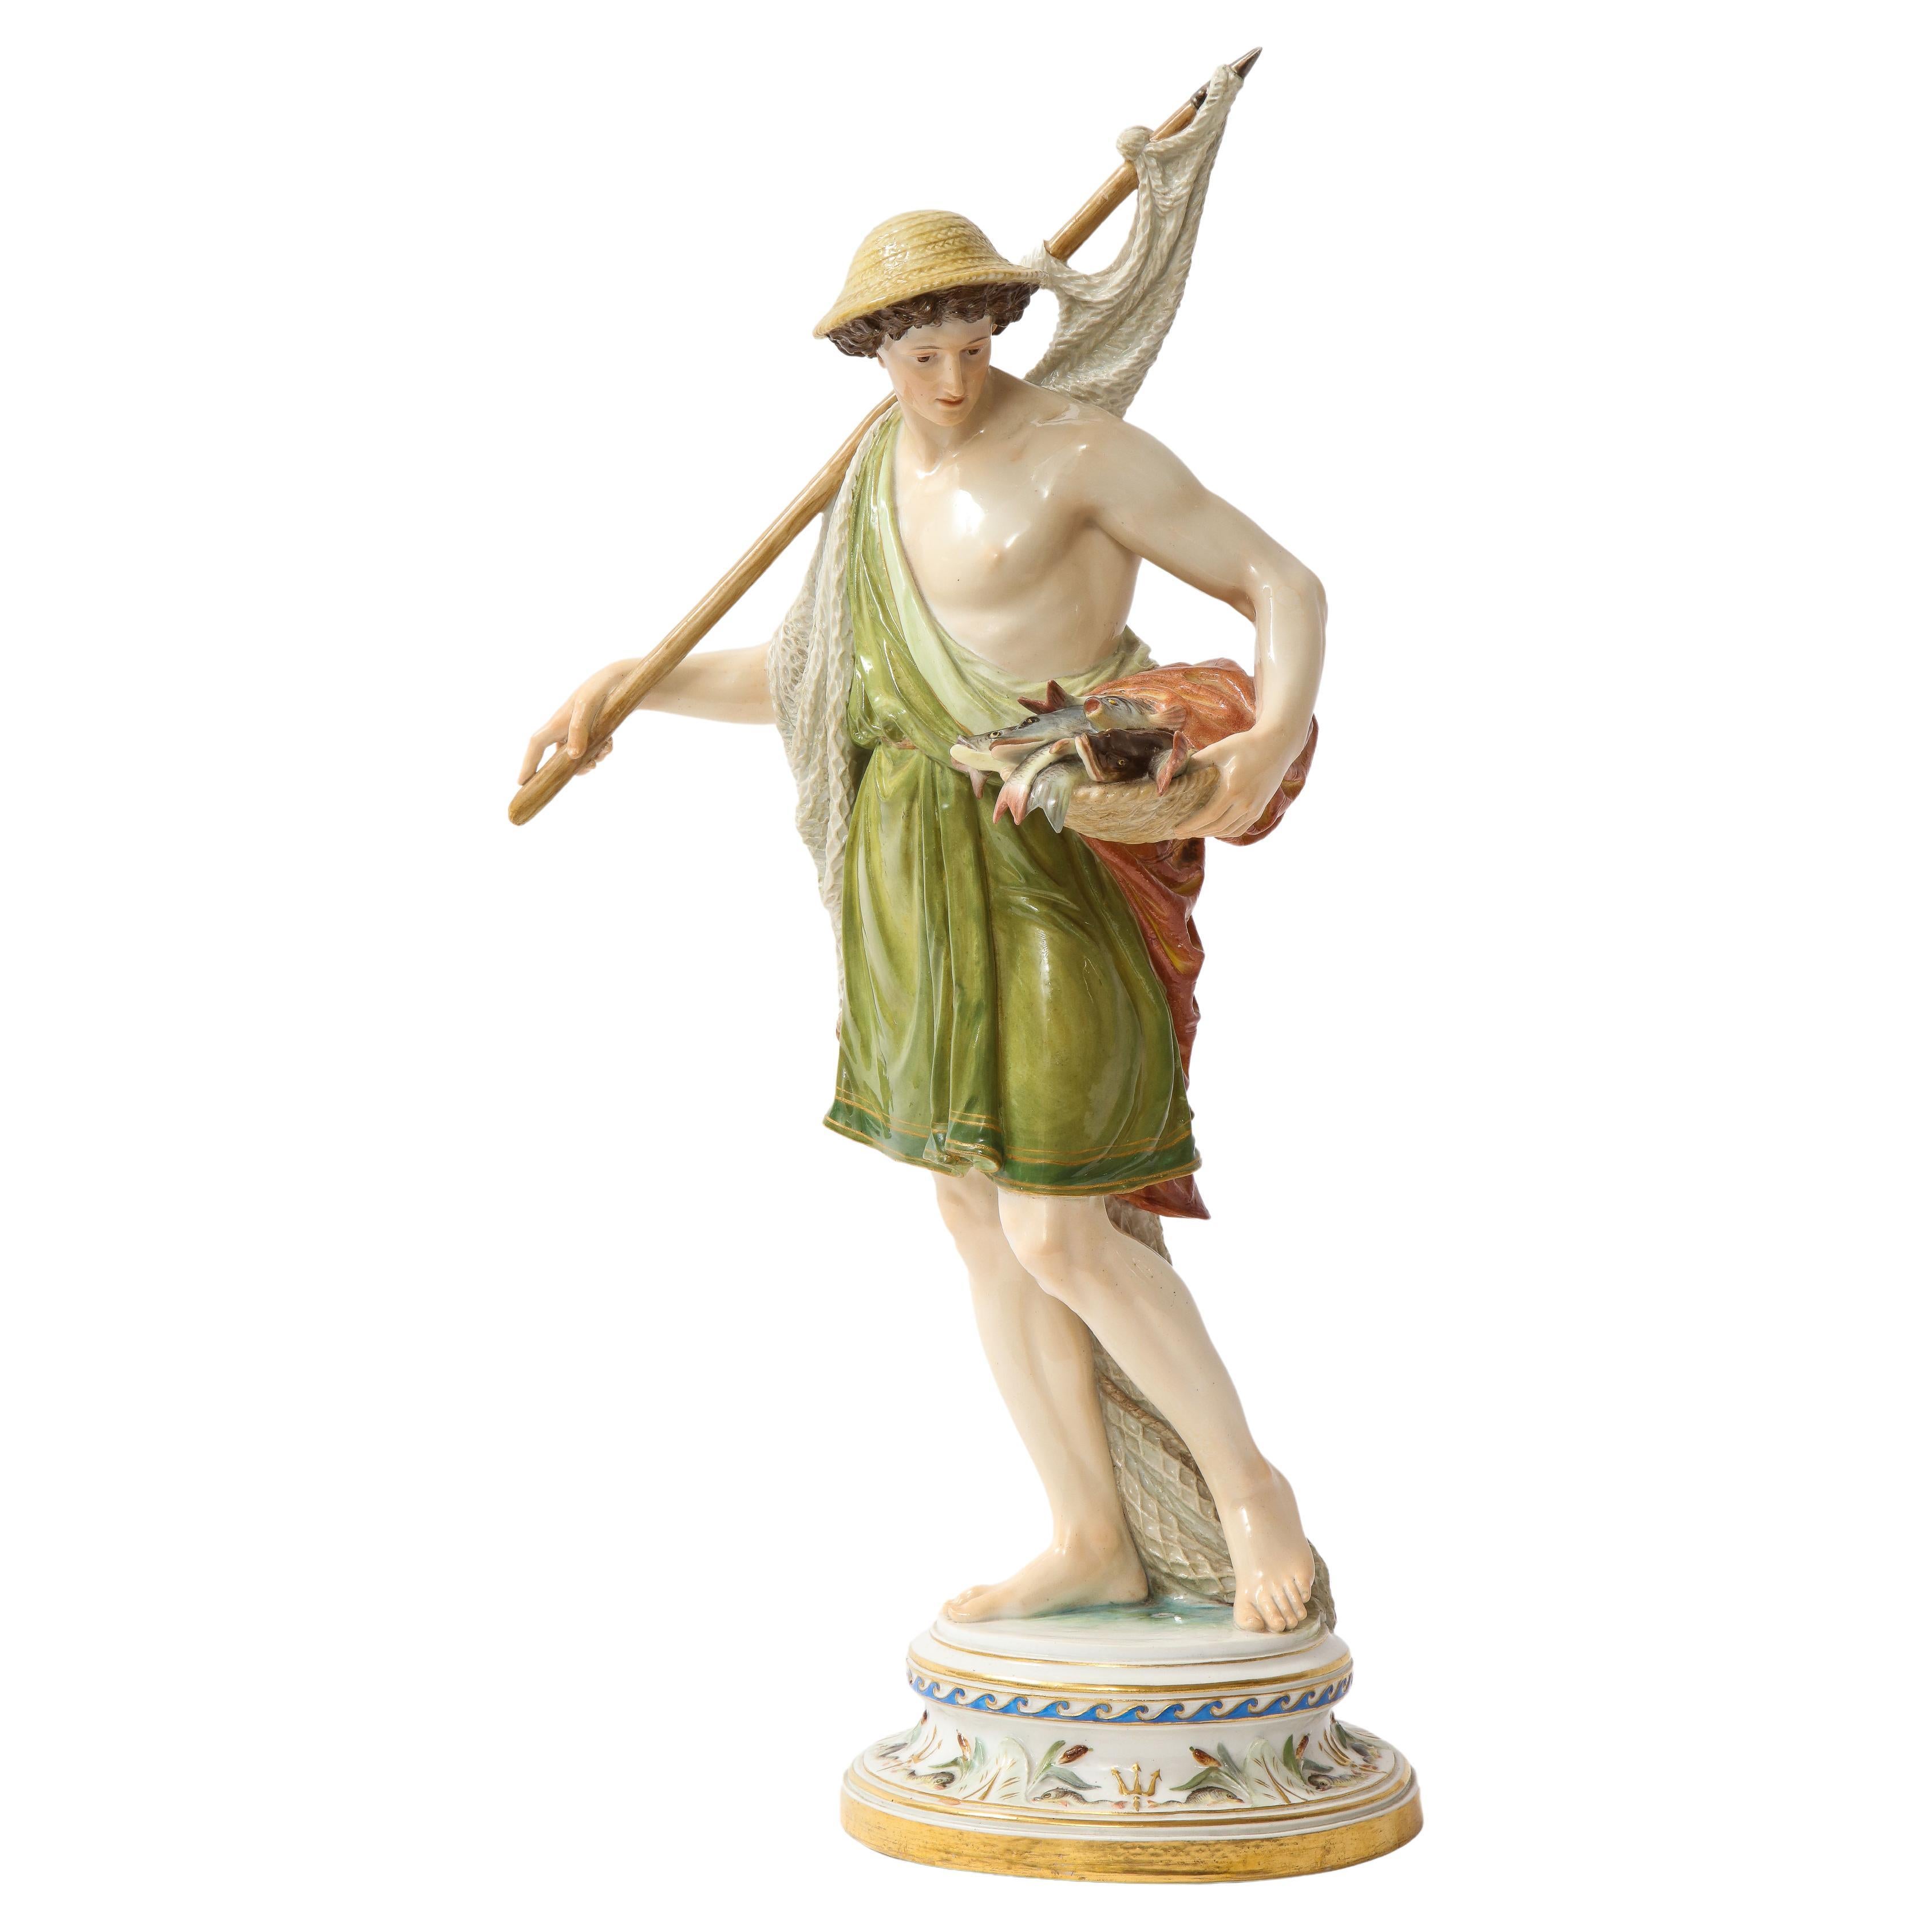 A Large 19th C. Meissen Porcelain Figure of a Fisherman with a Net For Sale